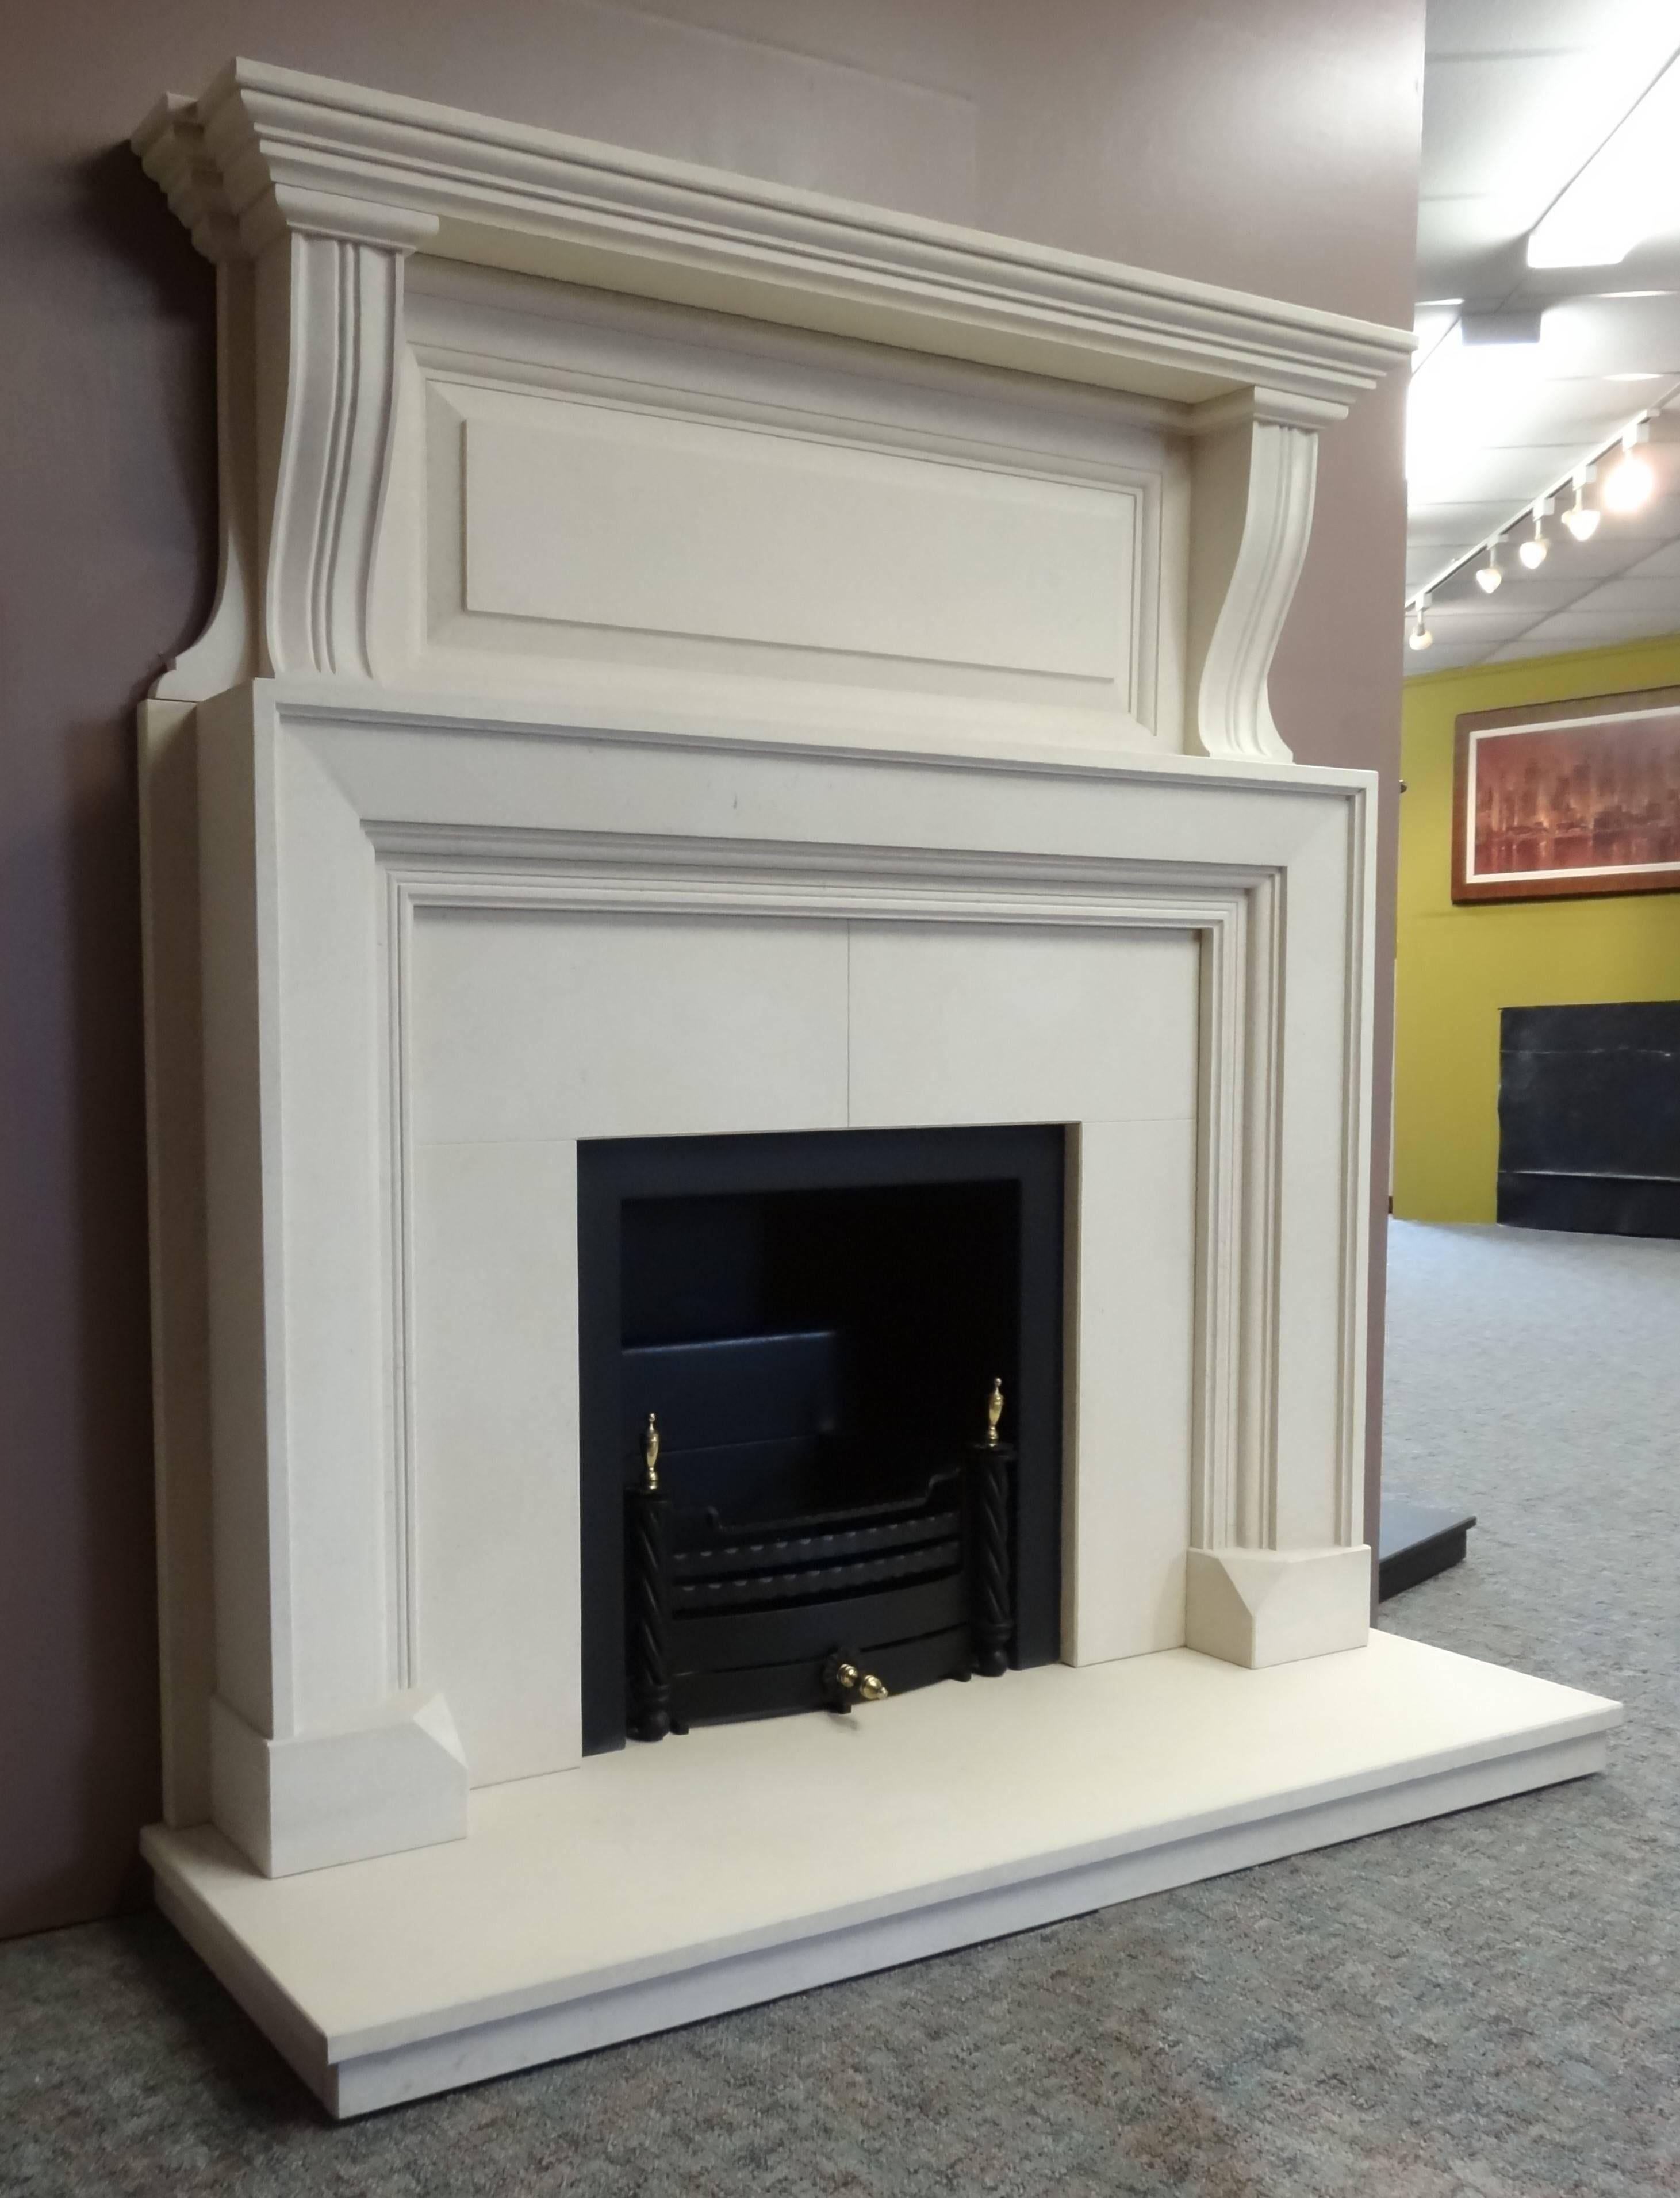 We created this fireplace in the Edwardian style from Limestone. The fireplace comprises a matching Limestone Hearth, a black metal fire trim built in to the Limestone Insert and a removable black and brass fire basket.

Measurements:
Mantel 62